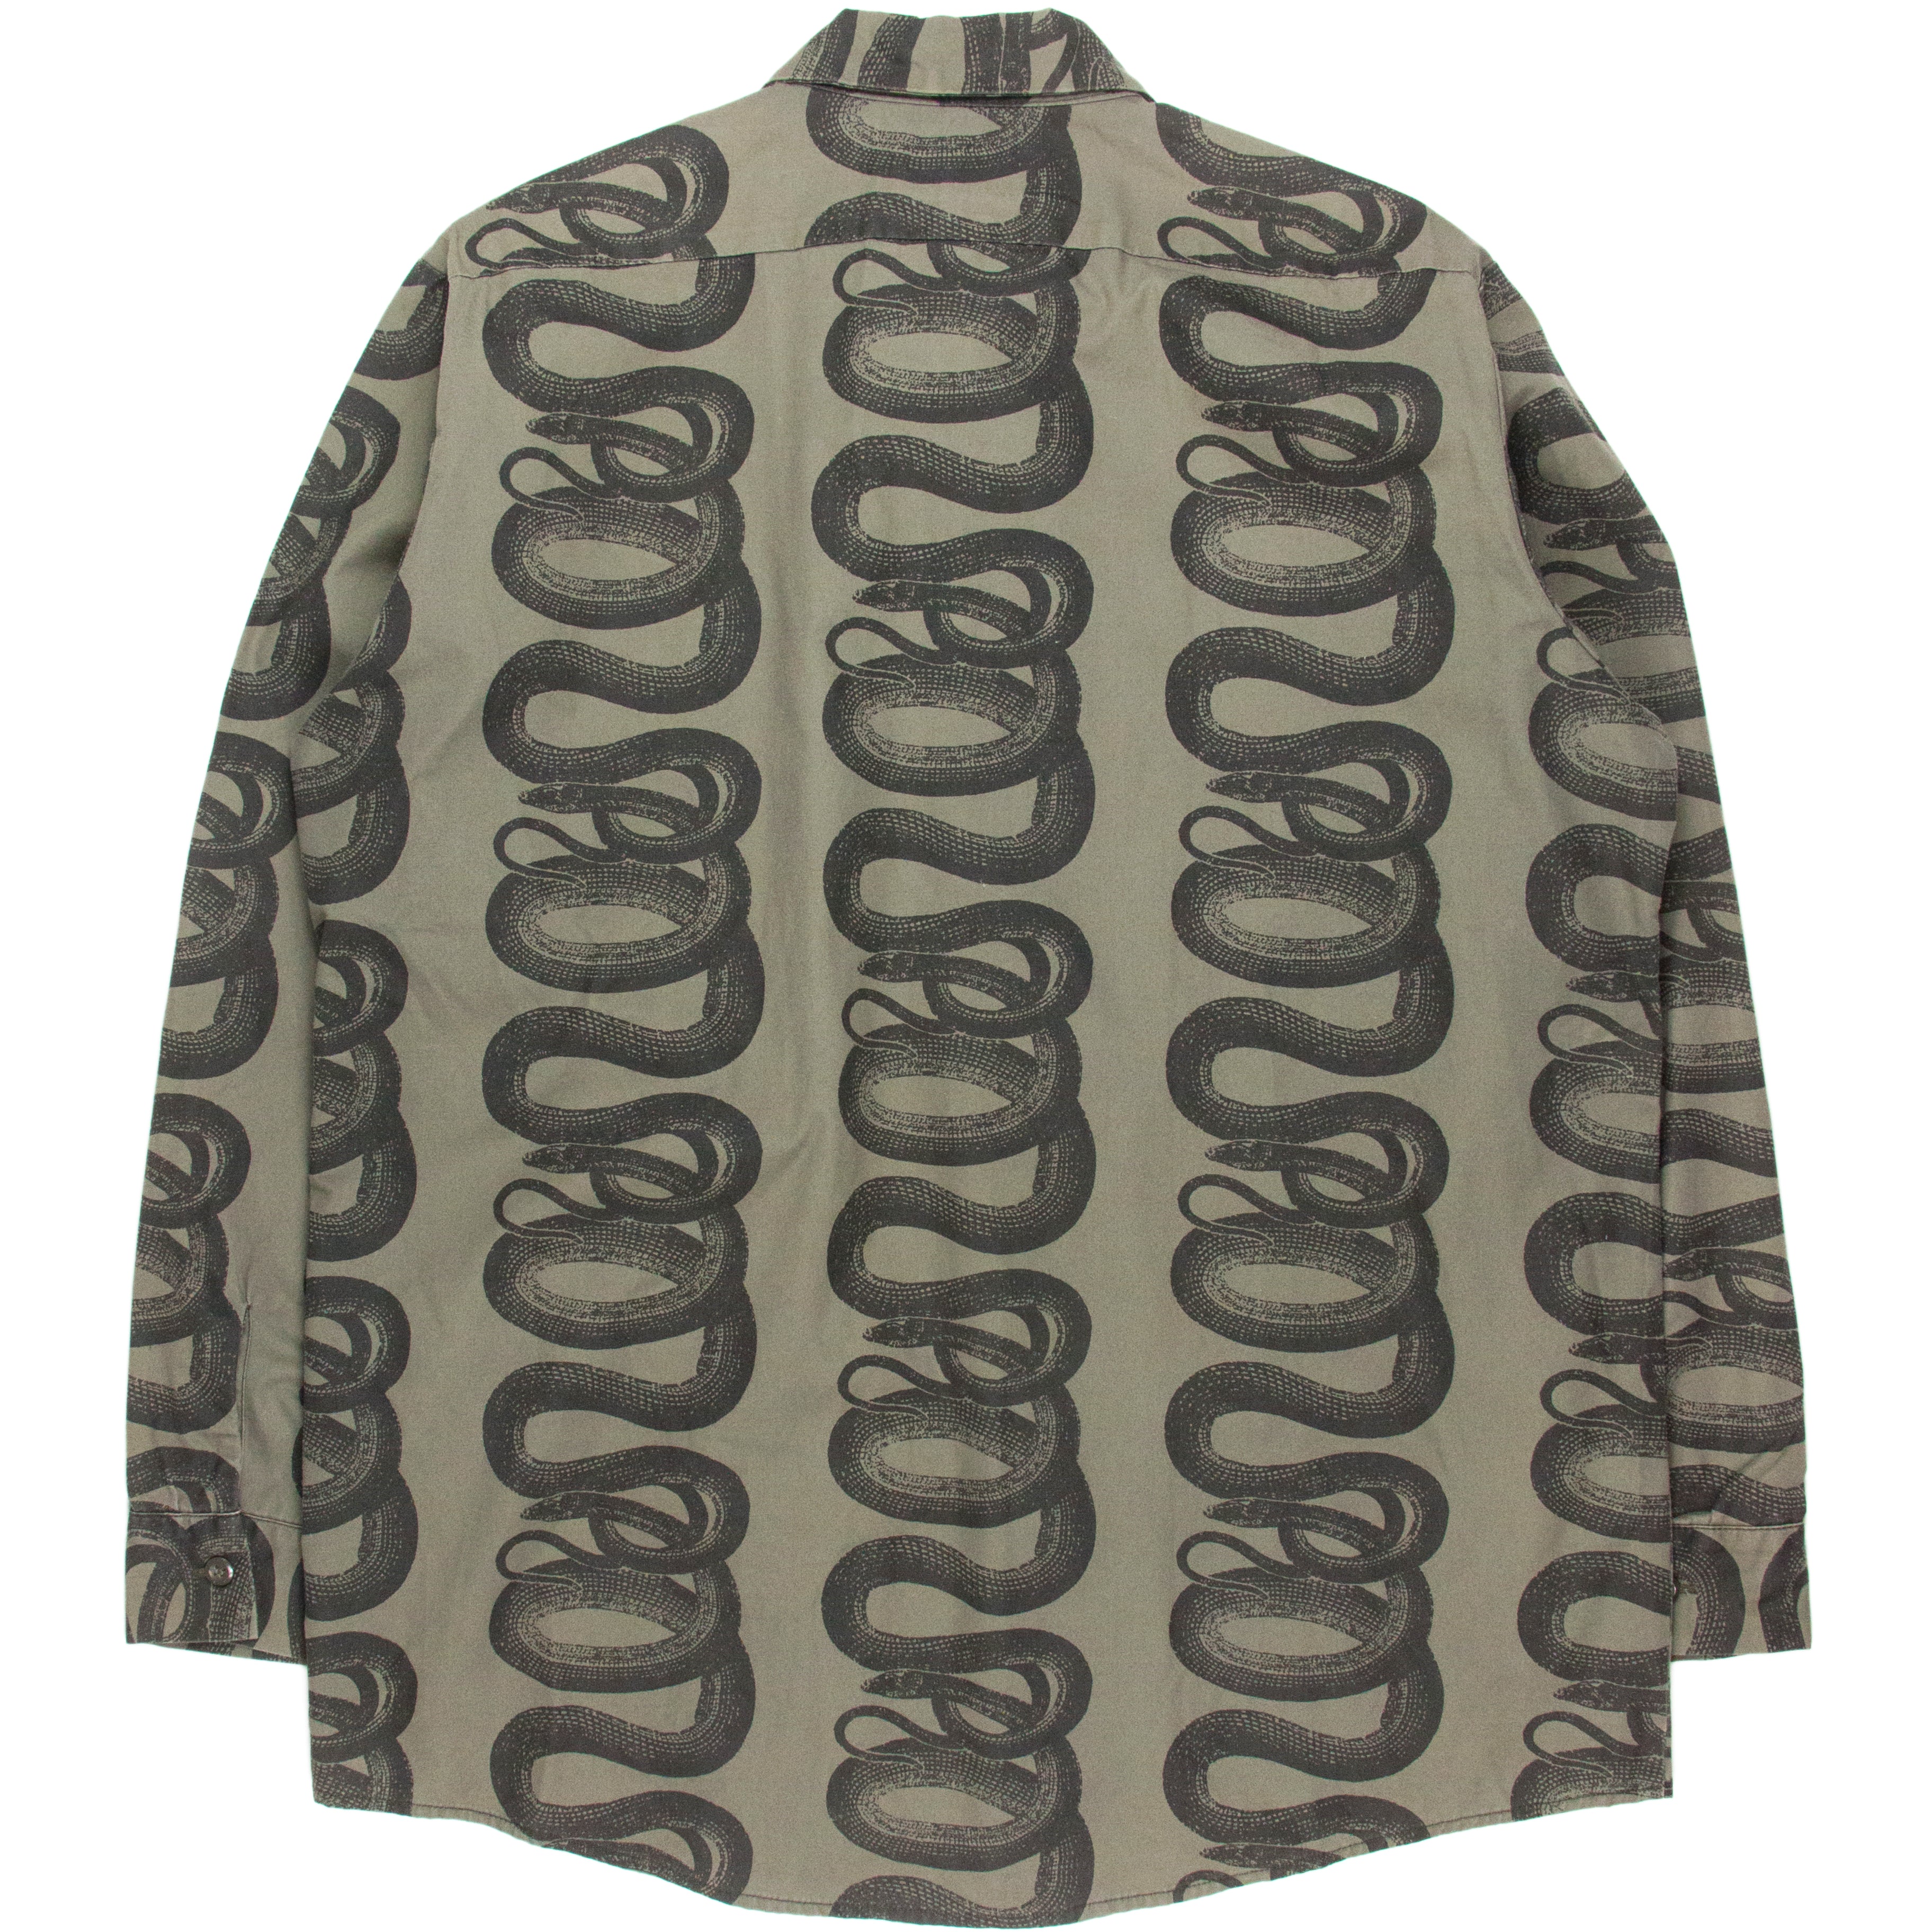 Hysteric Glamour Snake Shirt - SILVER LEAGUE